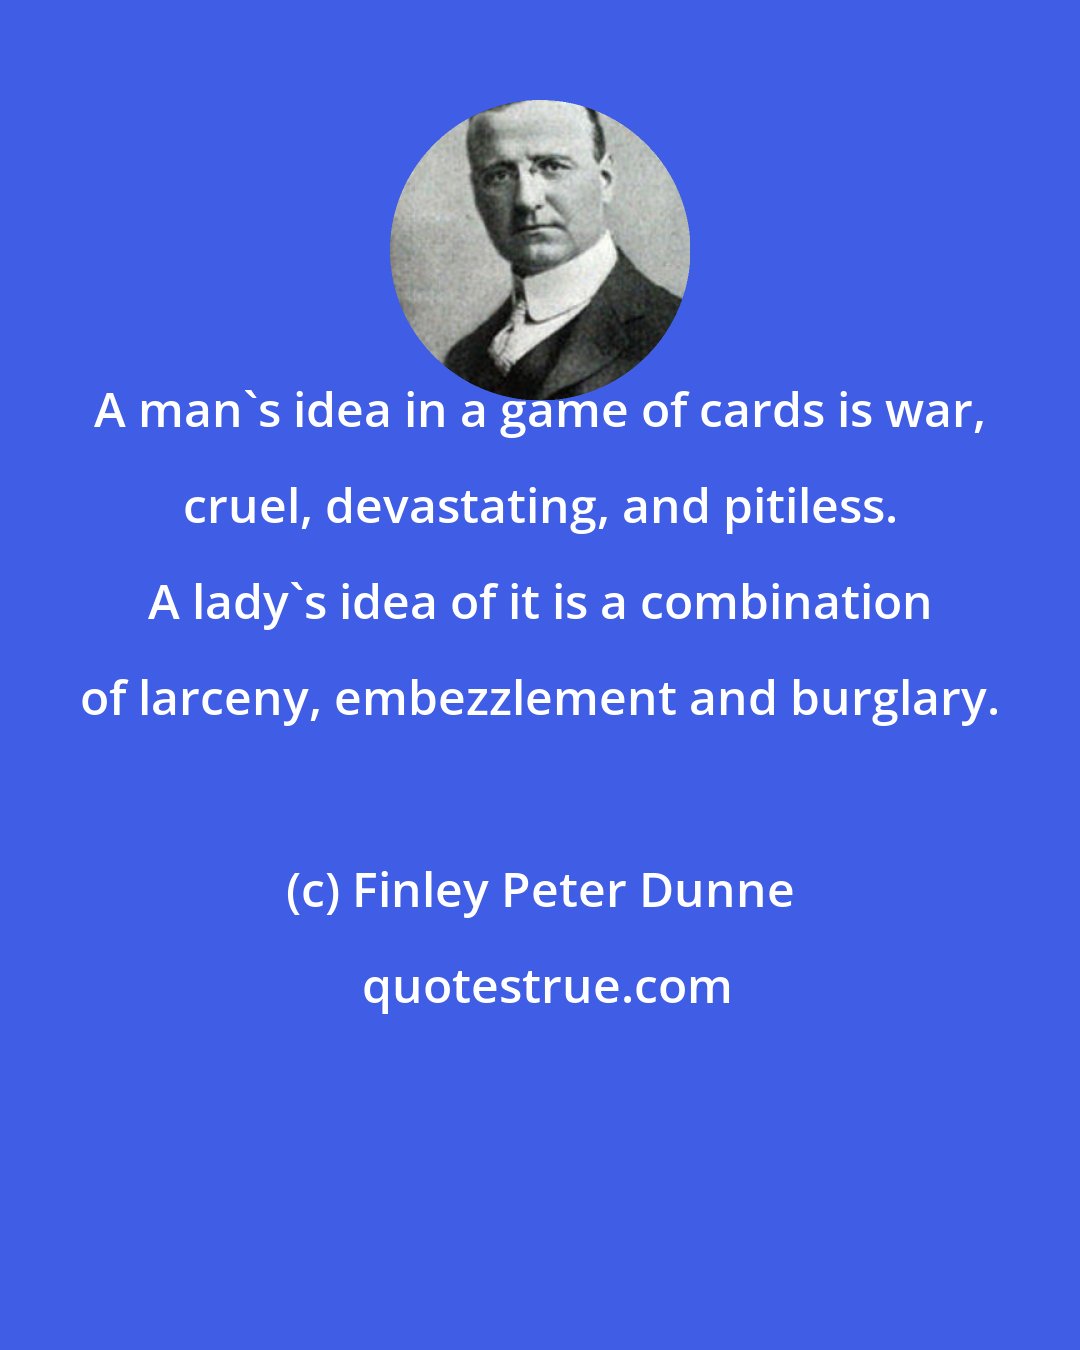 Finley Peter Dunne: A man's idea in a game of cards is war, cruel, devastating, and pitiless. A lady's idea of it is a combination of larceny, embezzlement and burglary.